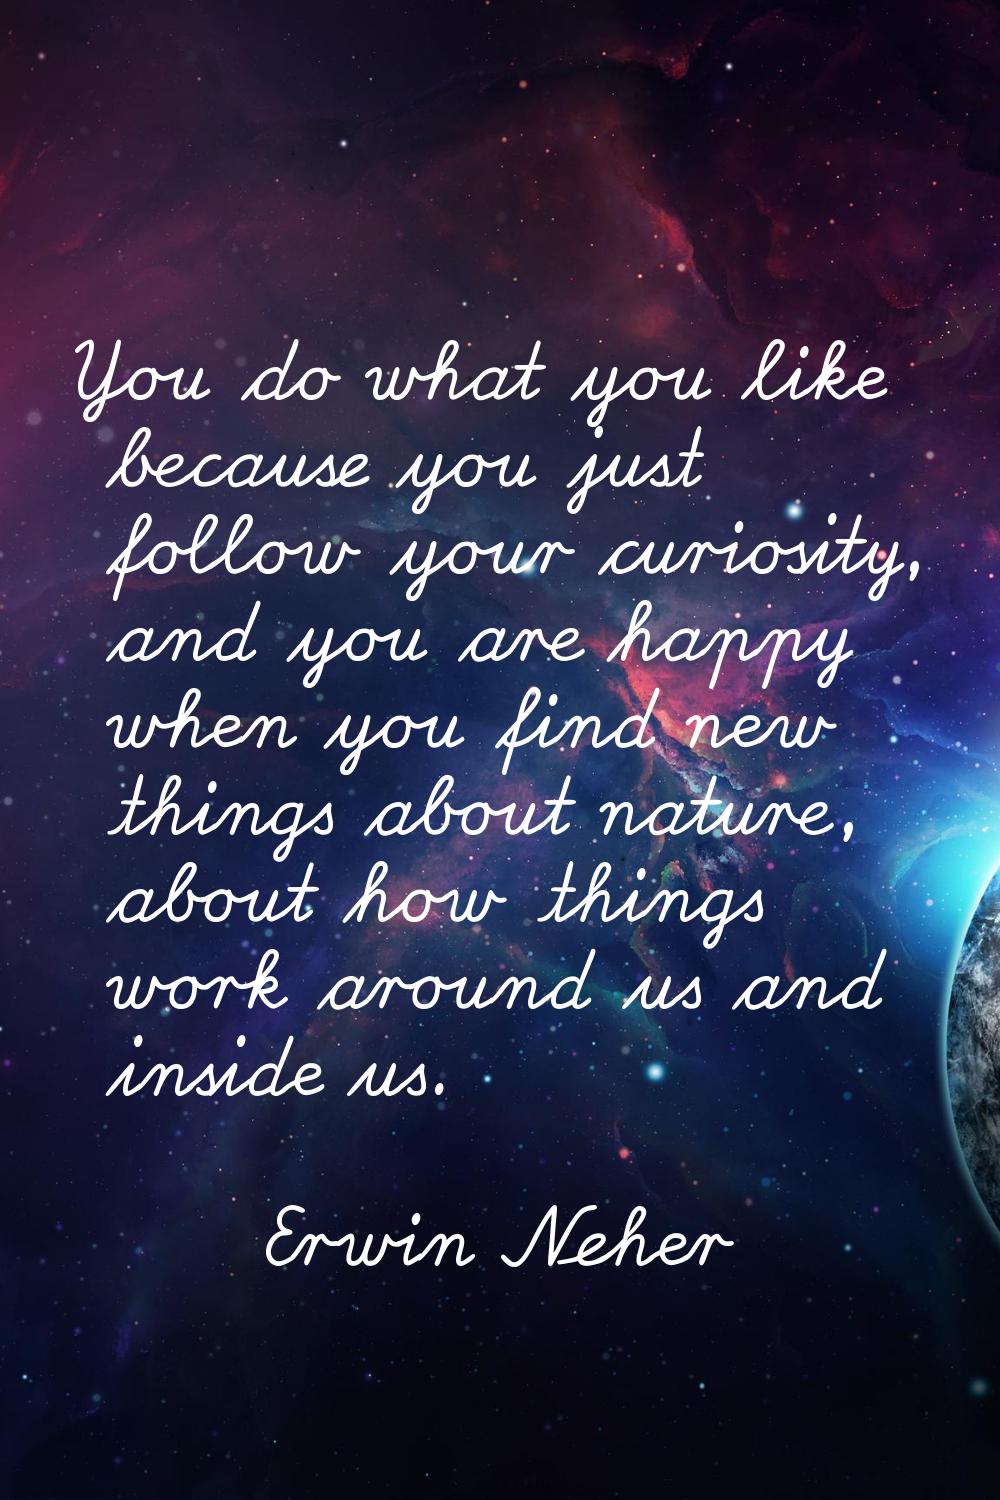 You do what you like because you just follow your curiosity, and you are happy when you find new th